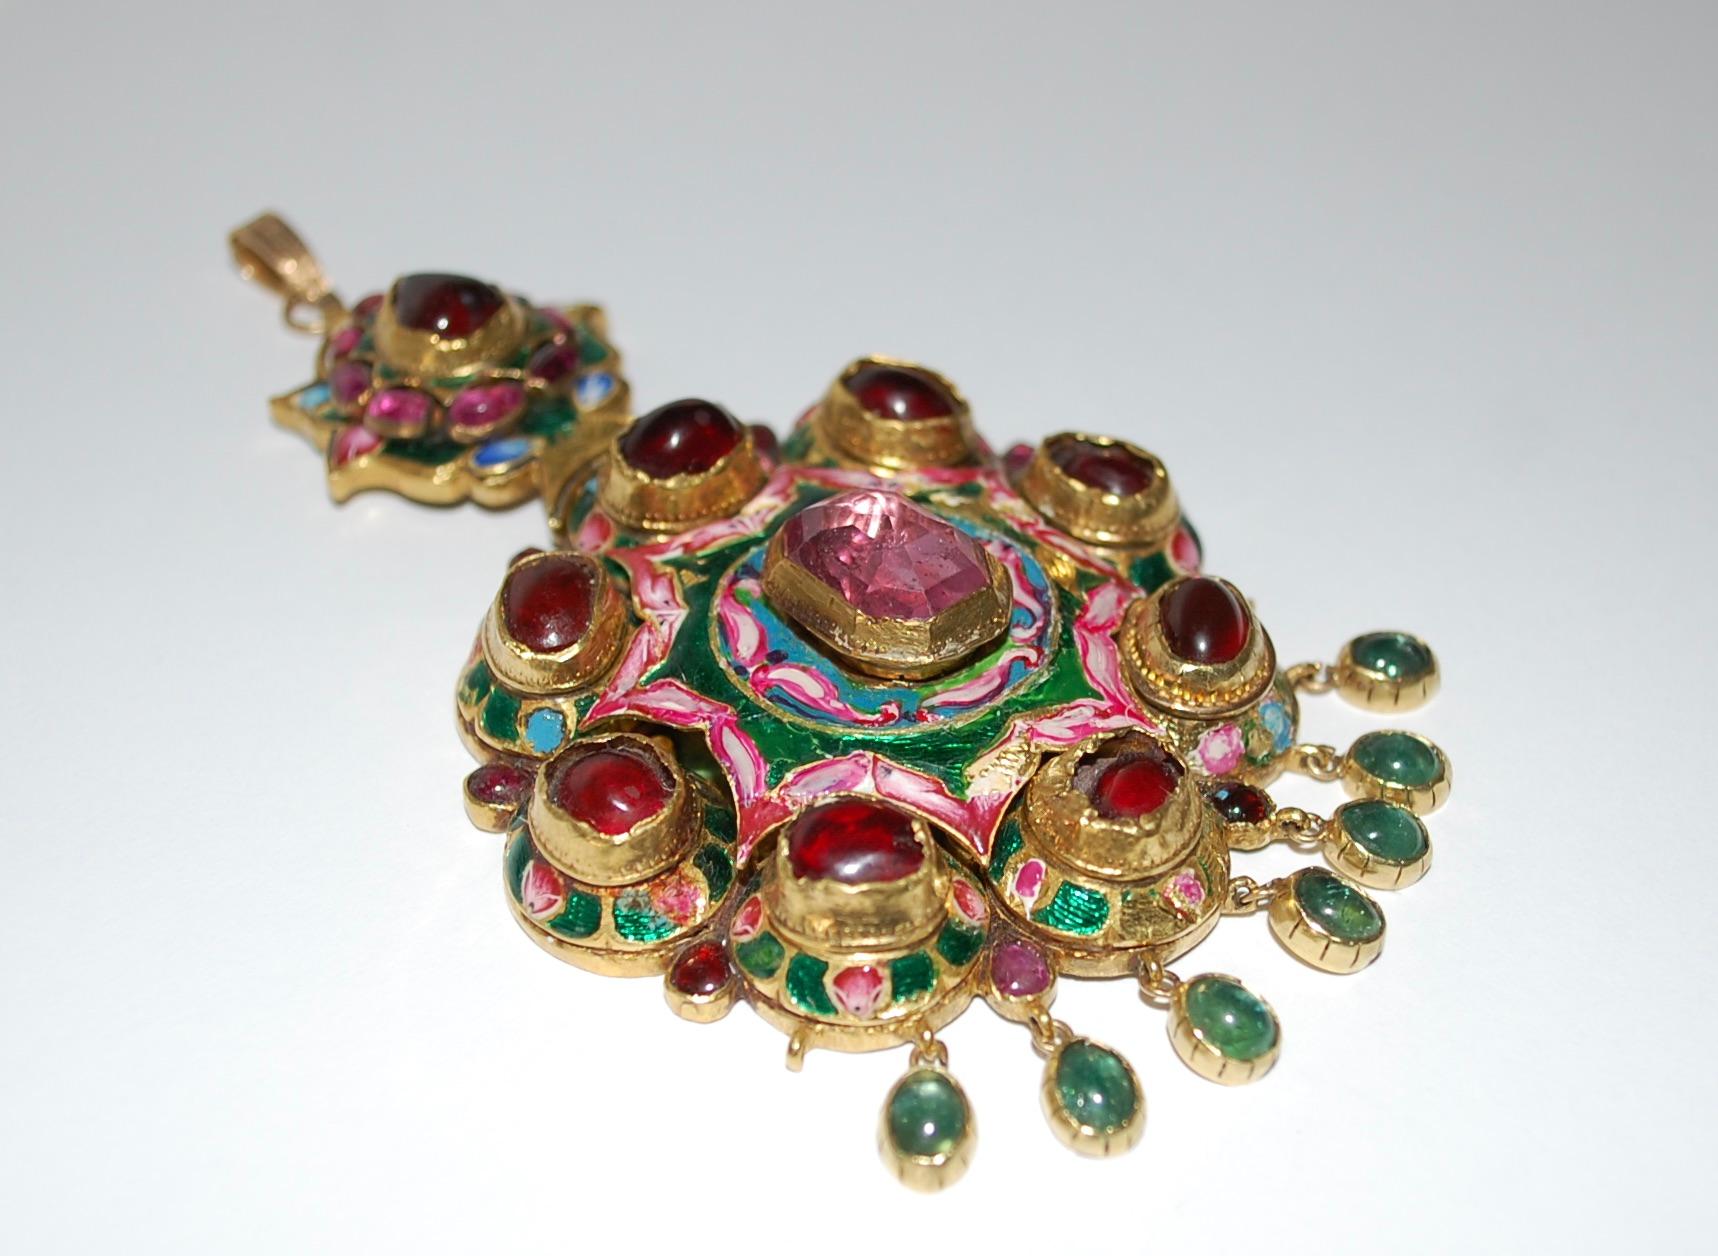 Antique 19th Century Persian 22K Gold Qajar Enameled Gem Set Gold Pendent
Rare and stunning large 22k yellow gold hand made pendant with jewels. 
The pendant is bezel set with one emerald cut genuine natural pink Sapphire. 
The Sapphire measures